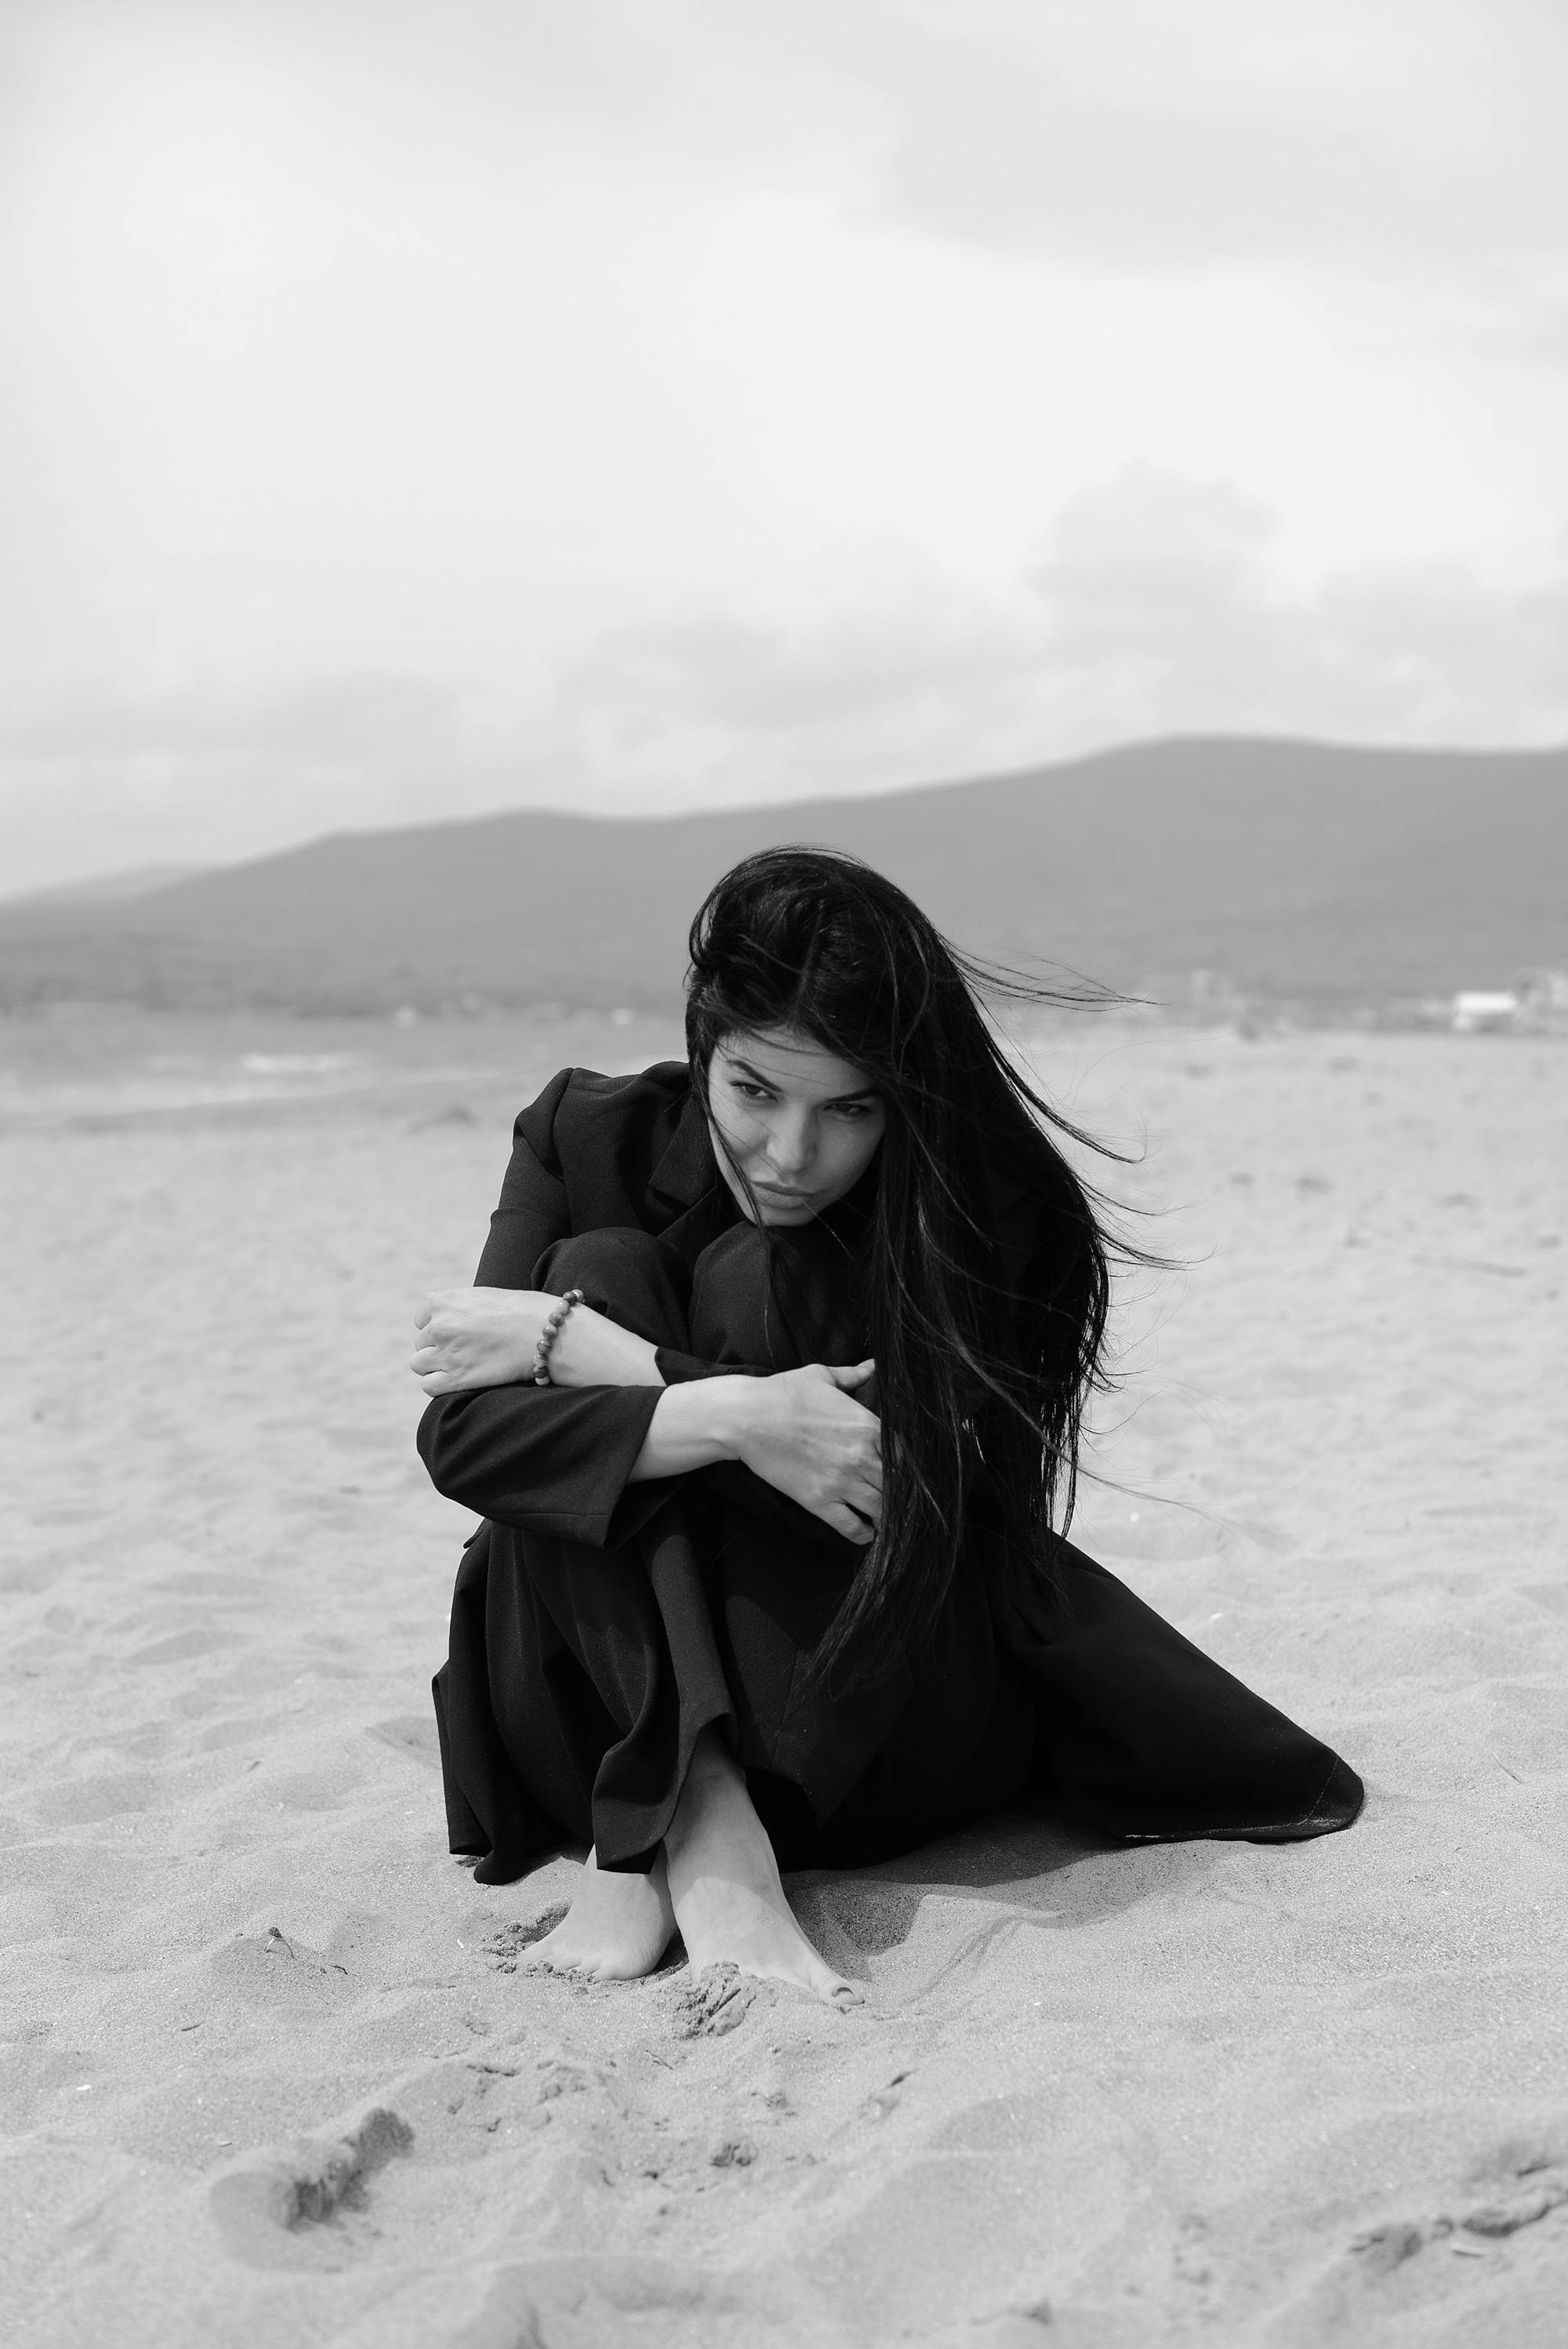 grayscale photo of a woman sitting on shore